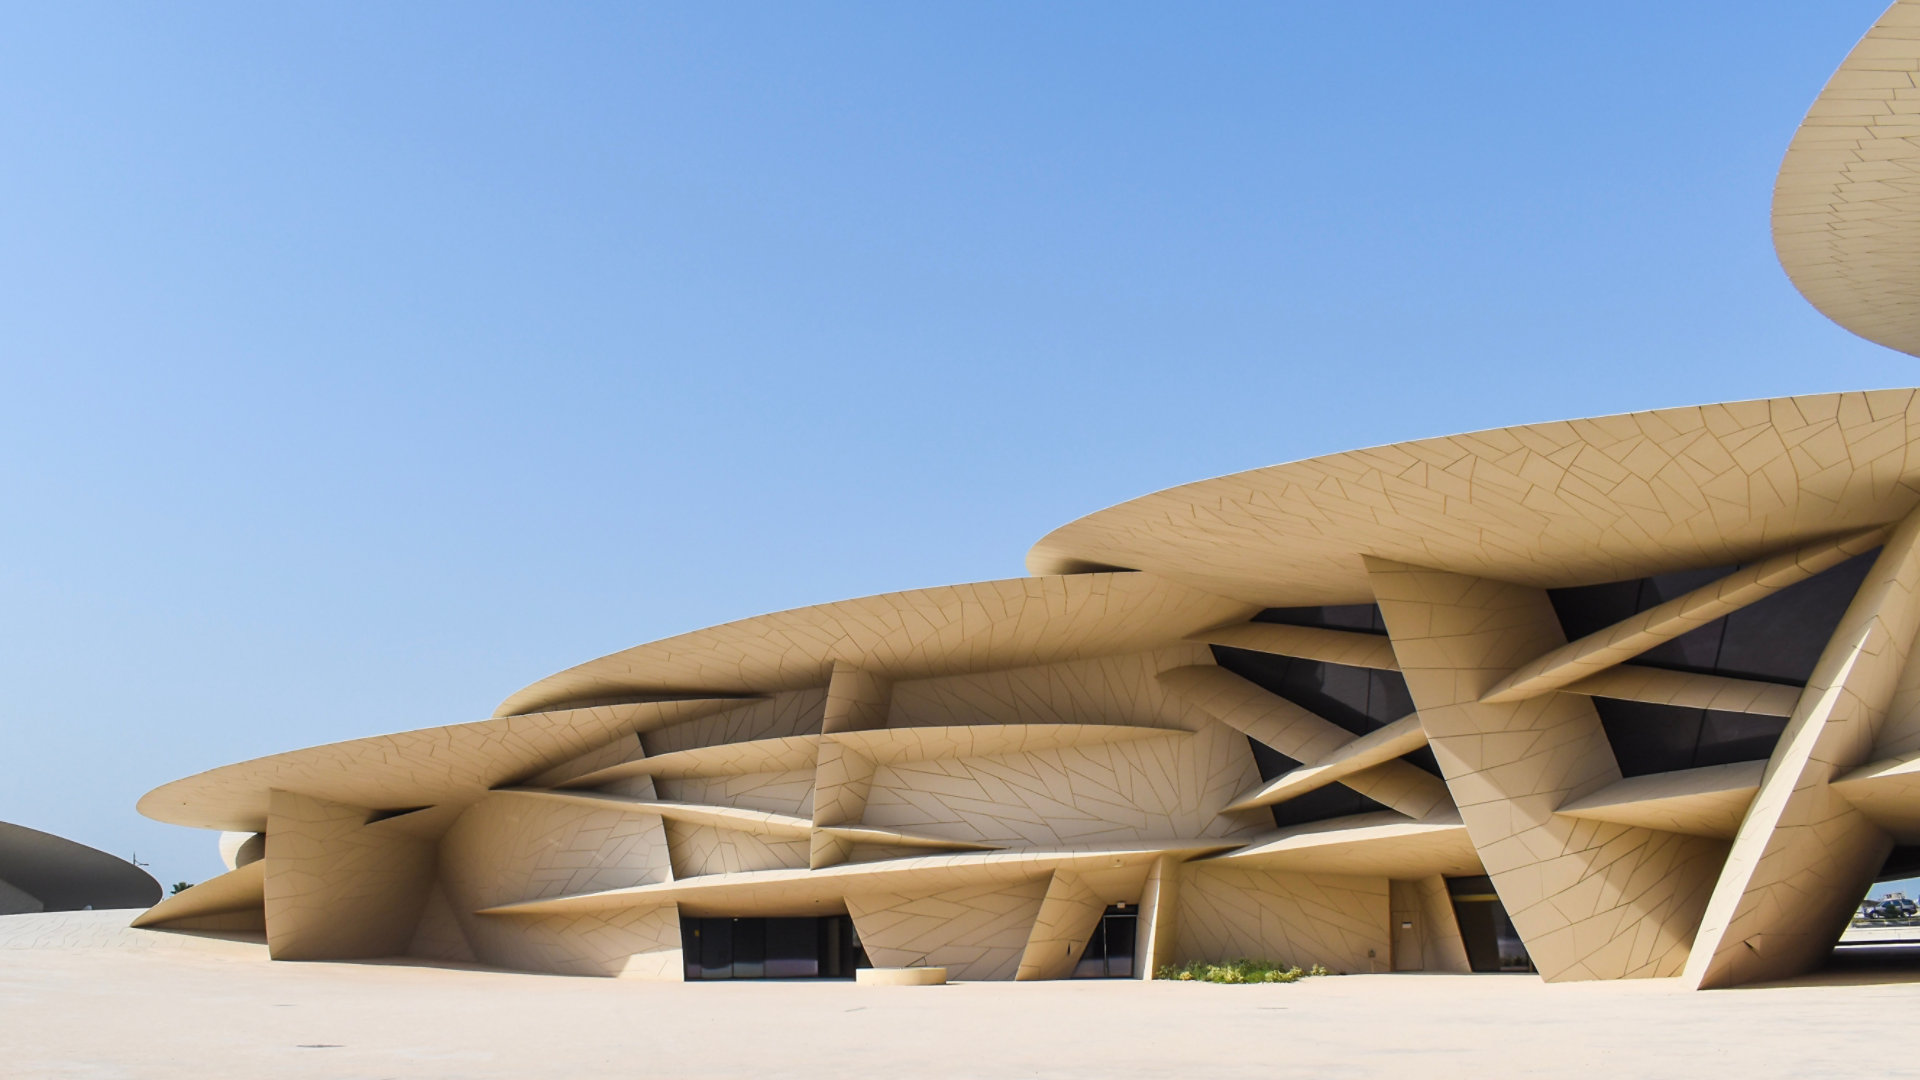 DOHA, QATAR - 25 June, 2019: The new National Museum of Qatar building. ; Shutterstock ID 1435588199; purchase_order: -; job: -; client: -; other: -